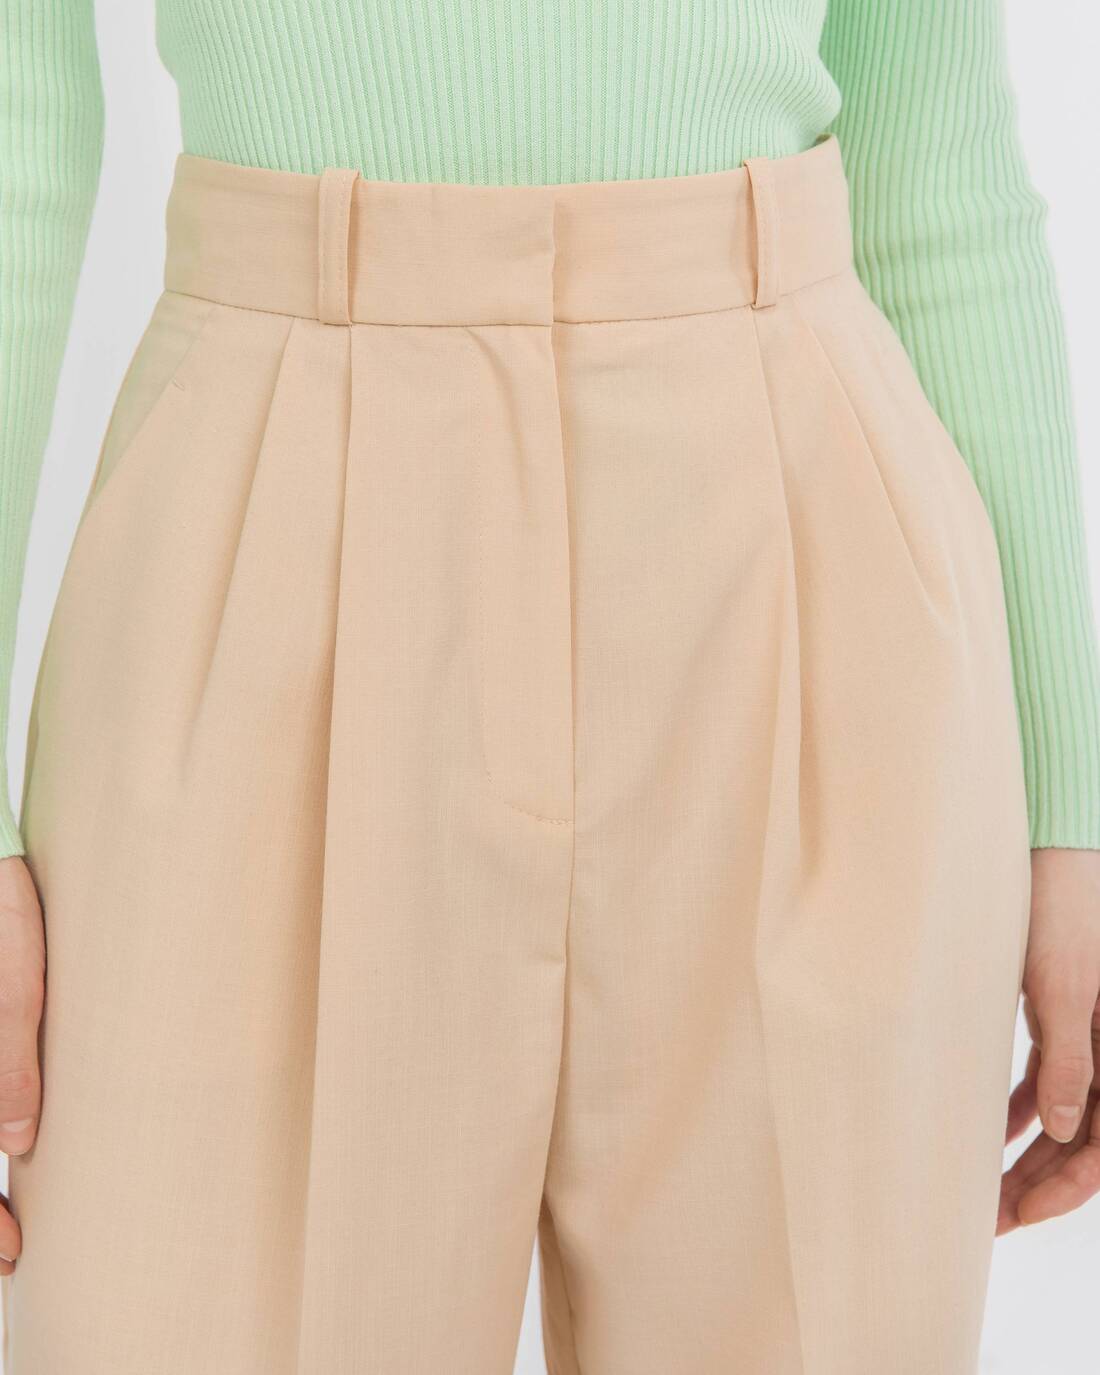 Costume pants with pleats